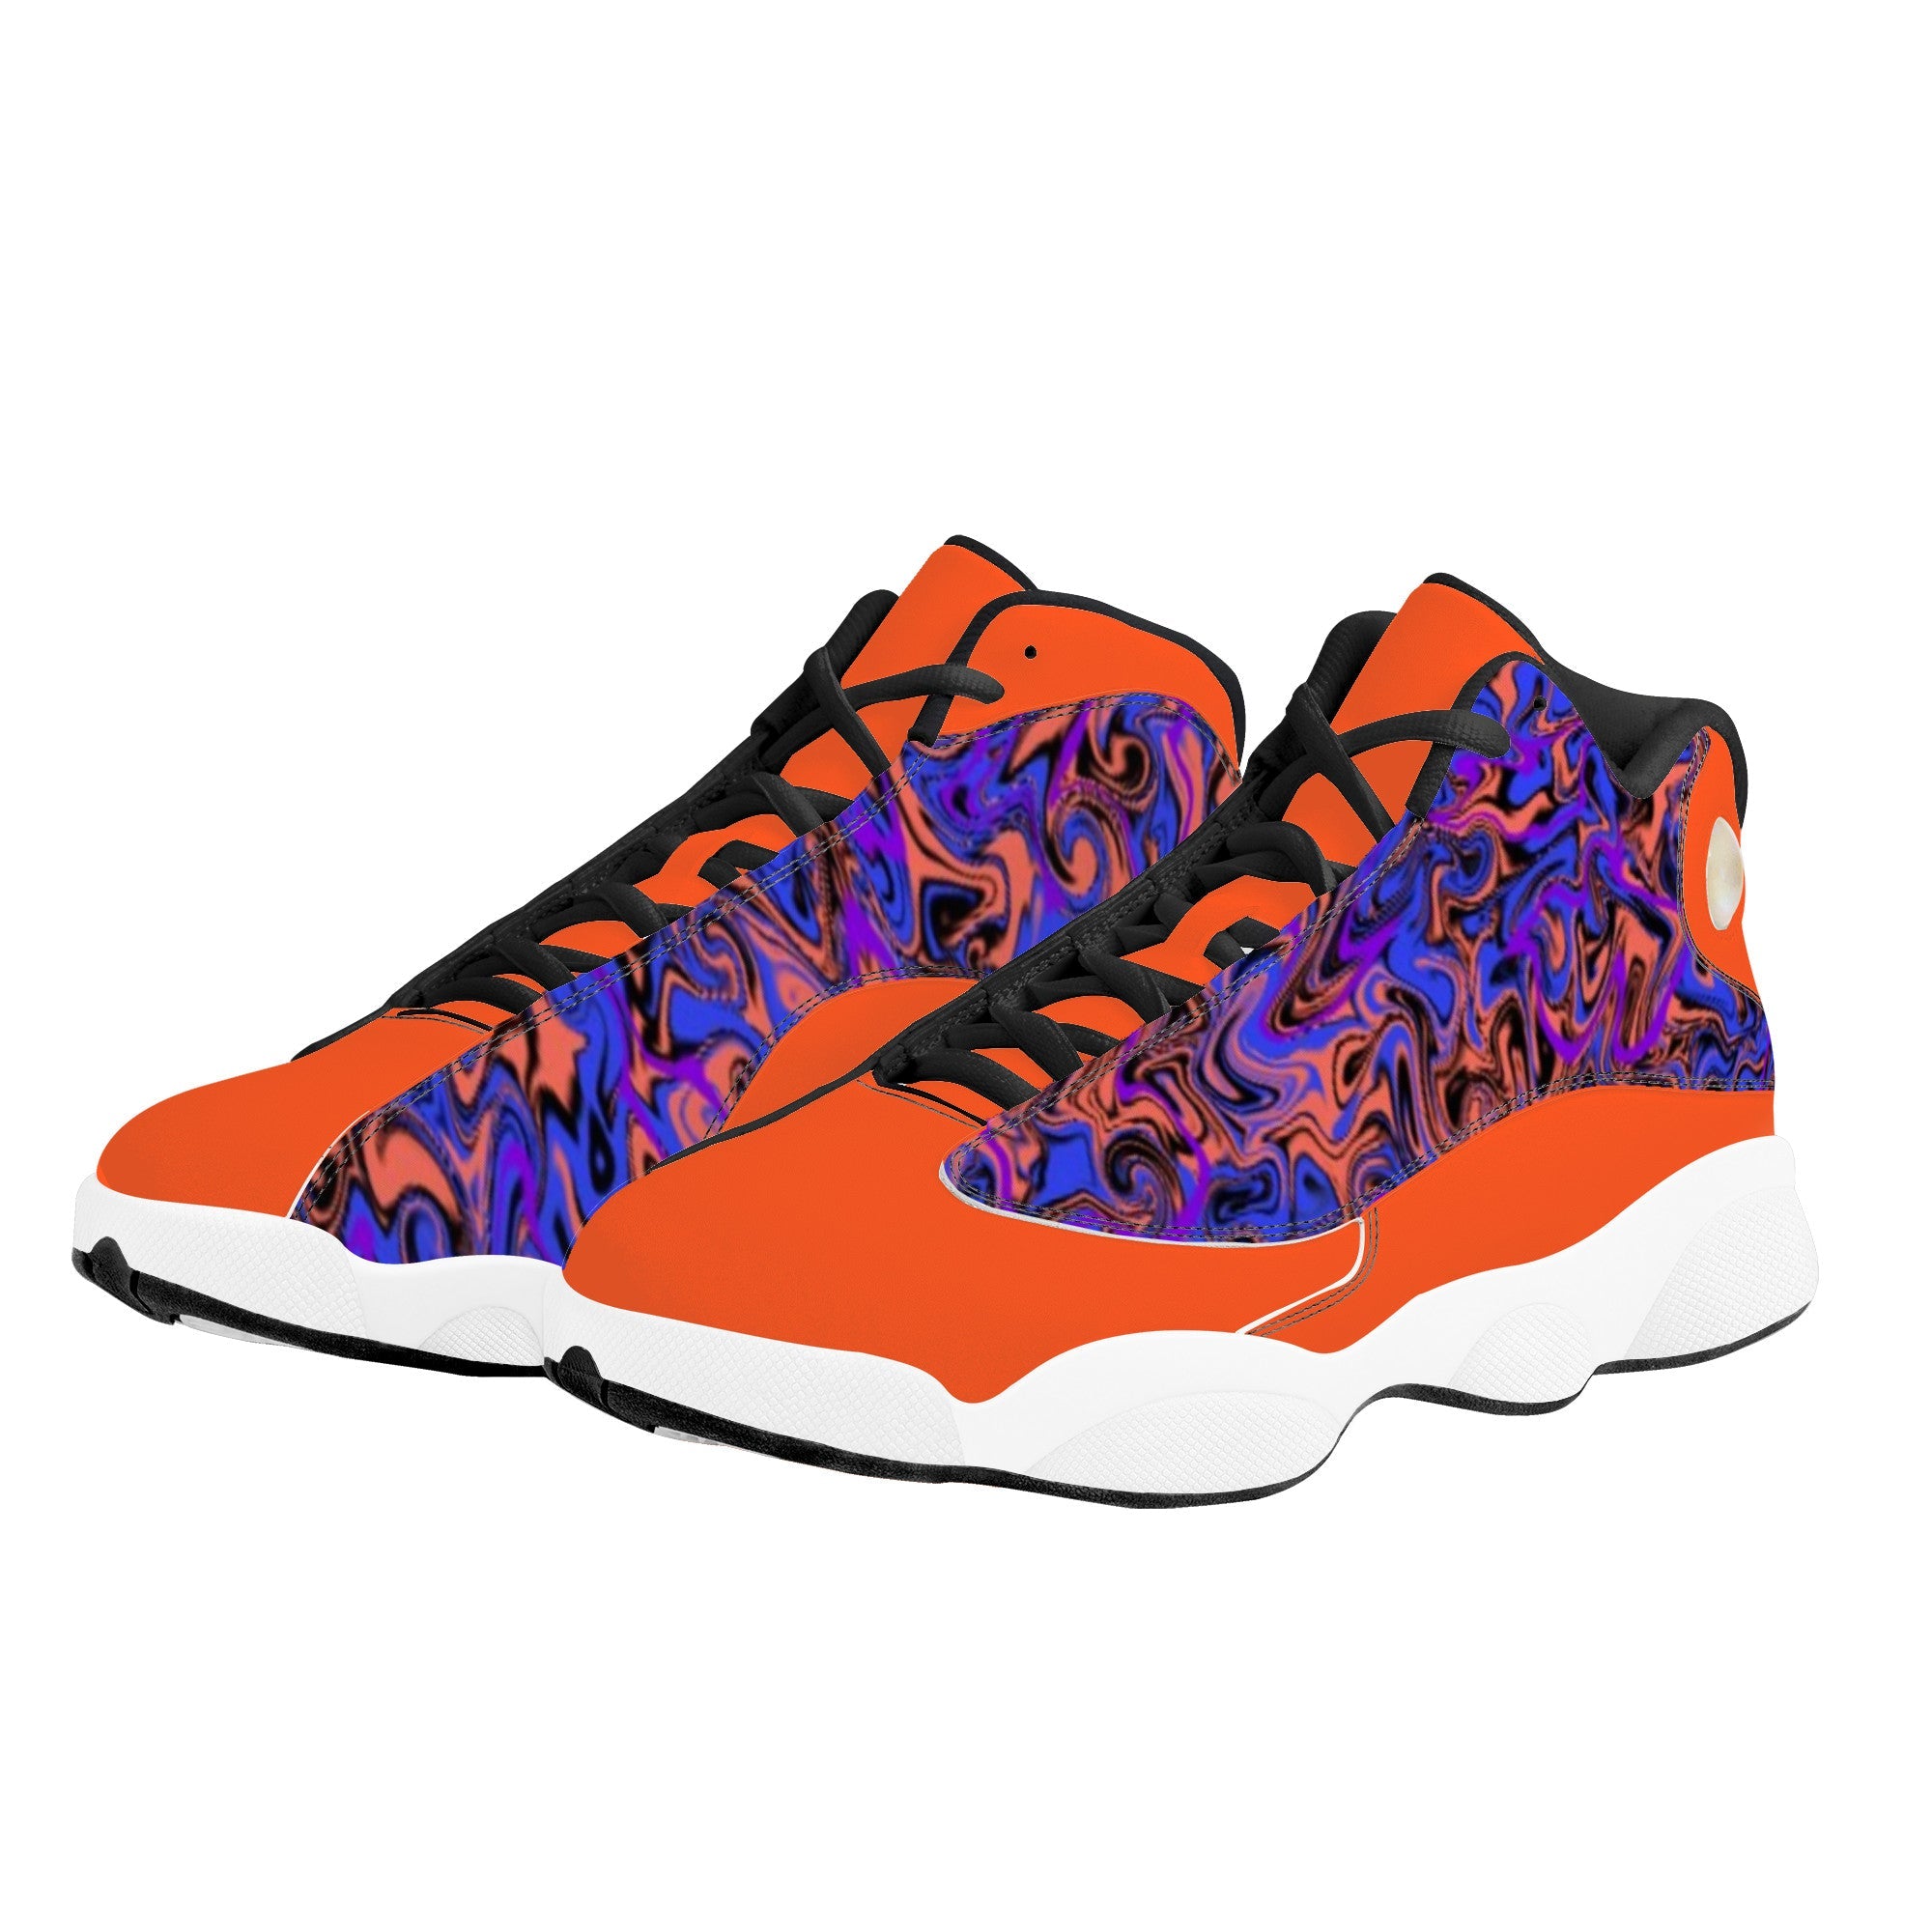 Trip Basketball Shoes - Black- updated design - basketball shoes at TFC&H Co.